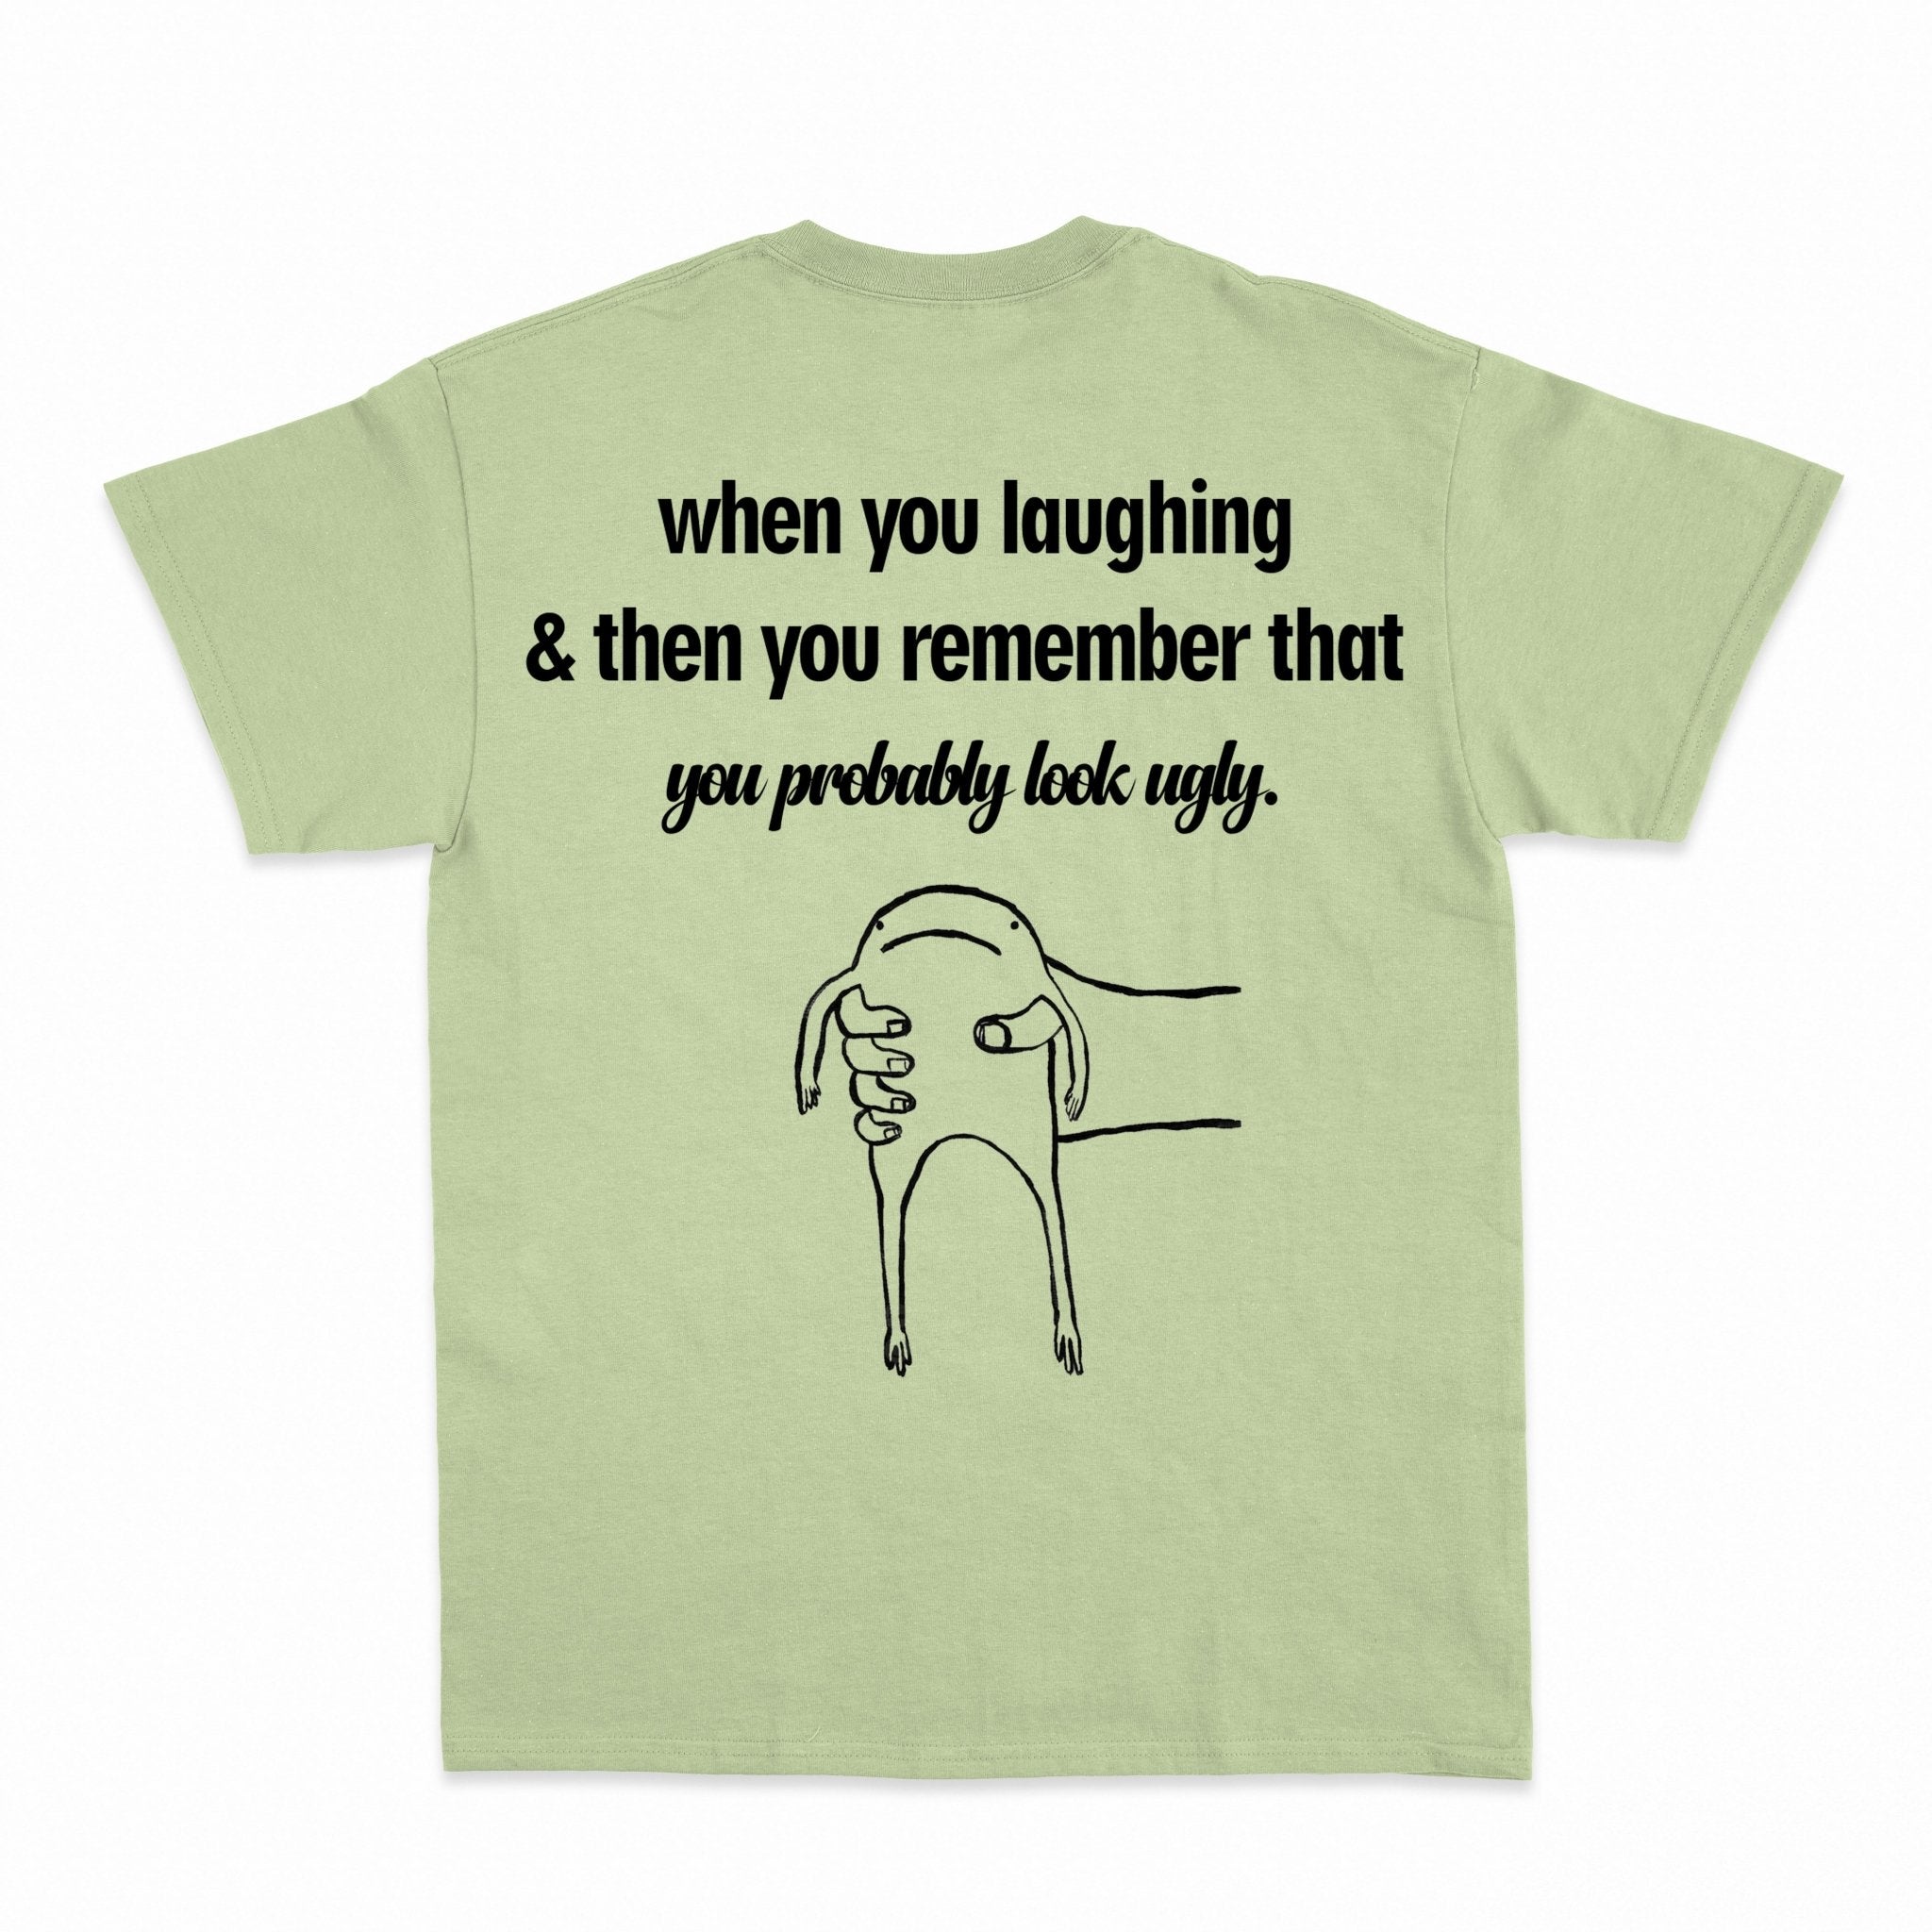 you probably look ugly Shirt - Shapelys